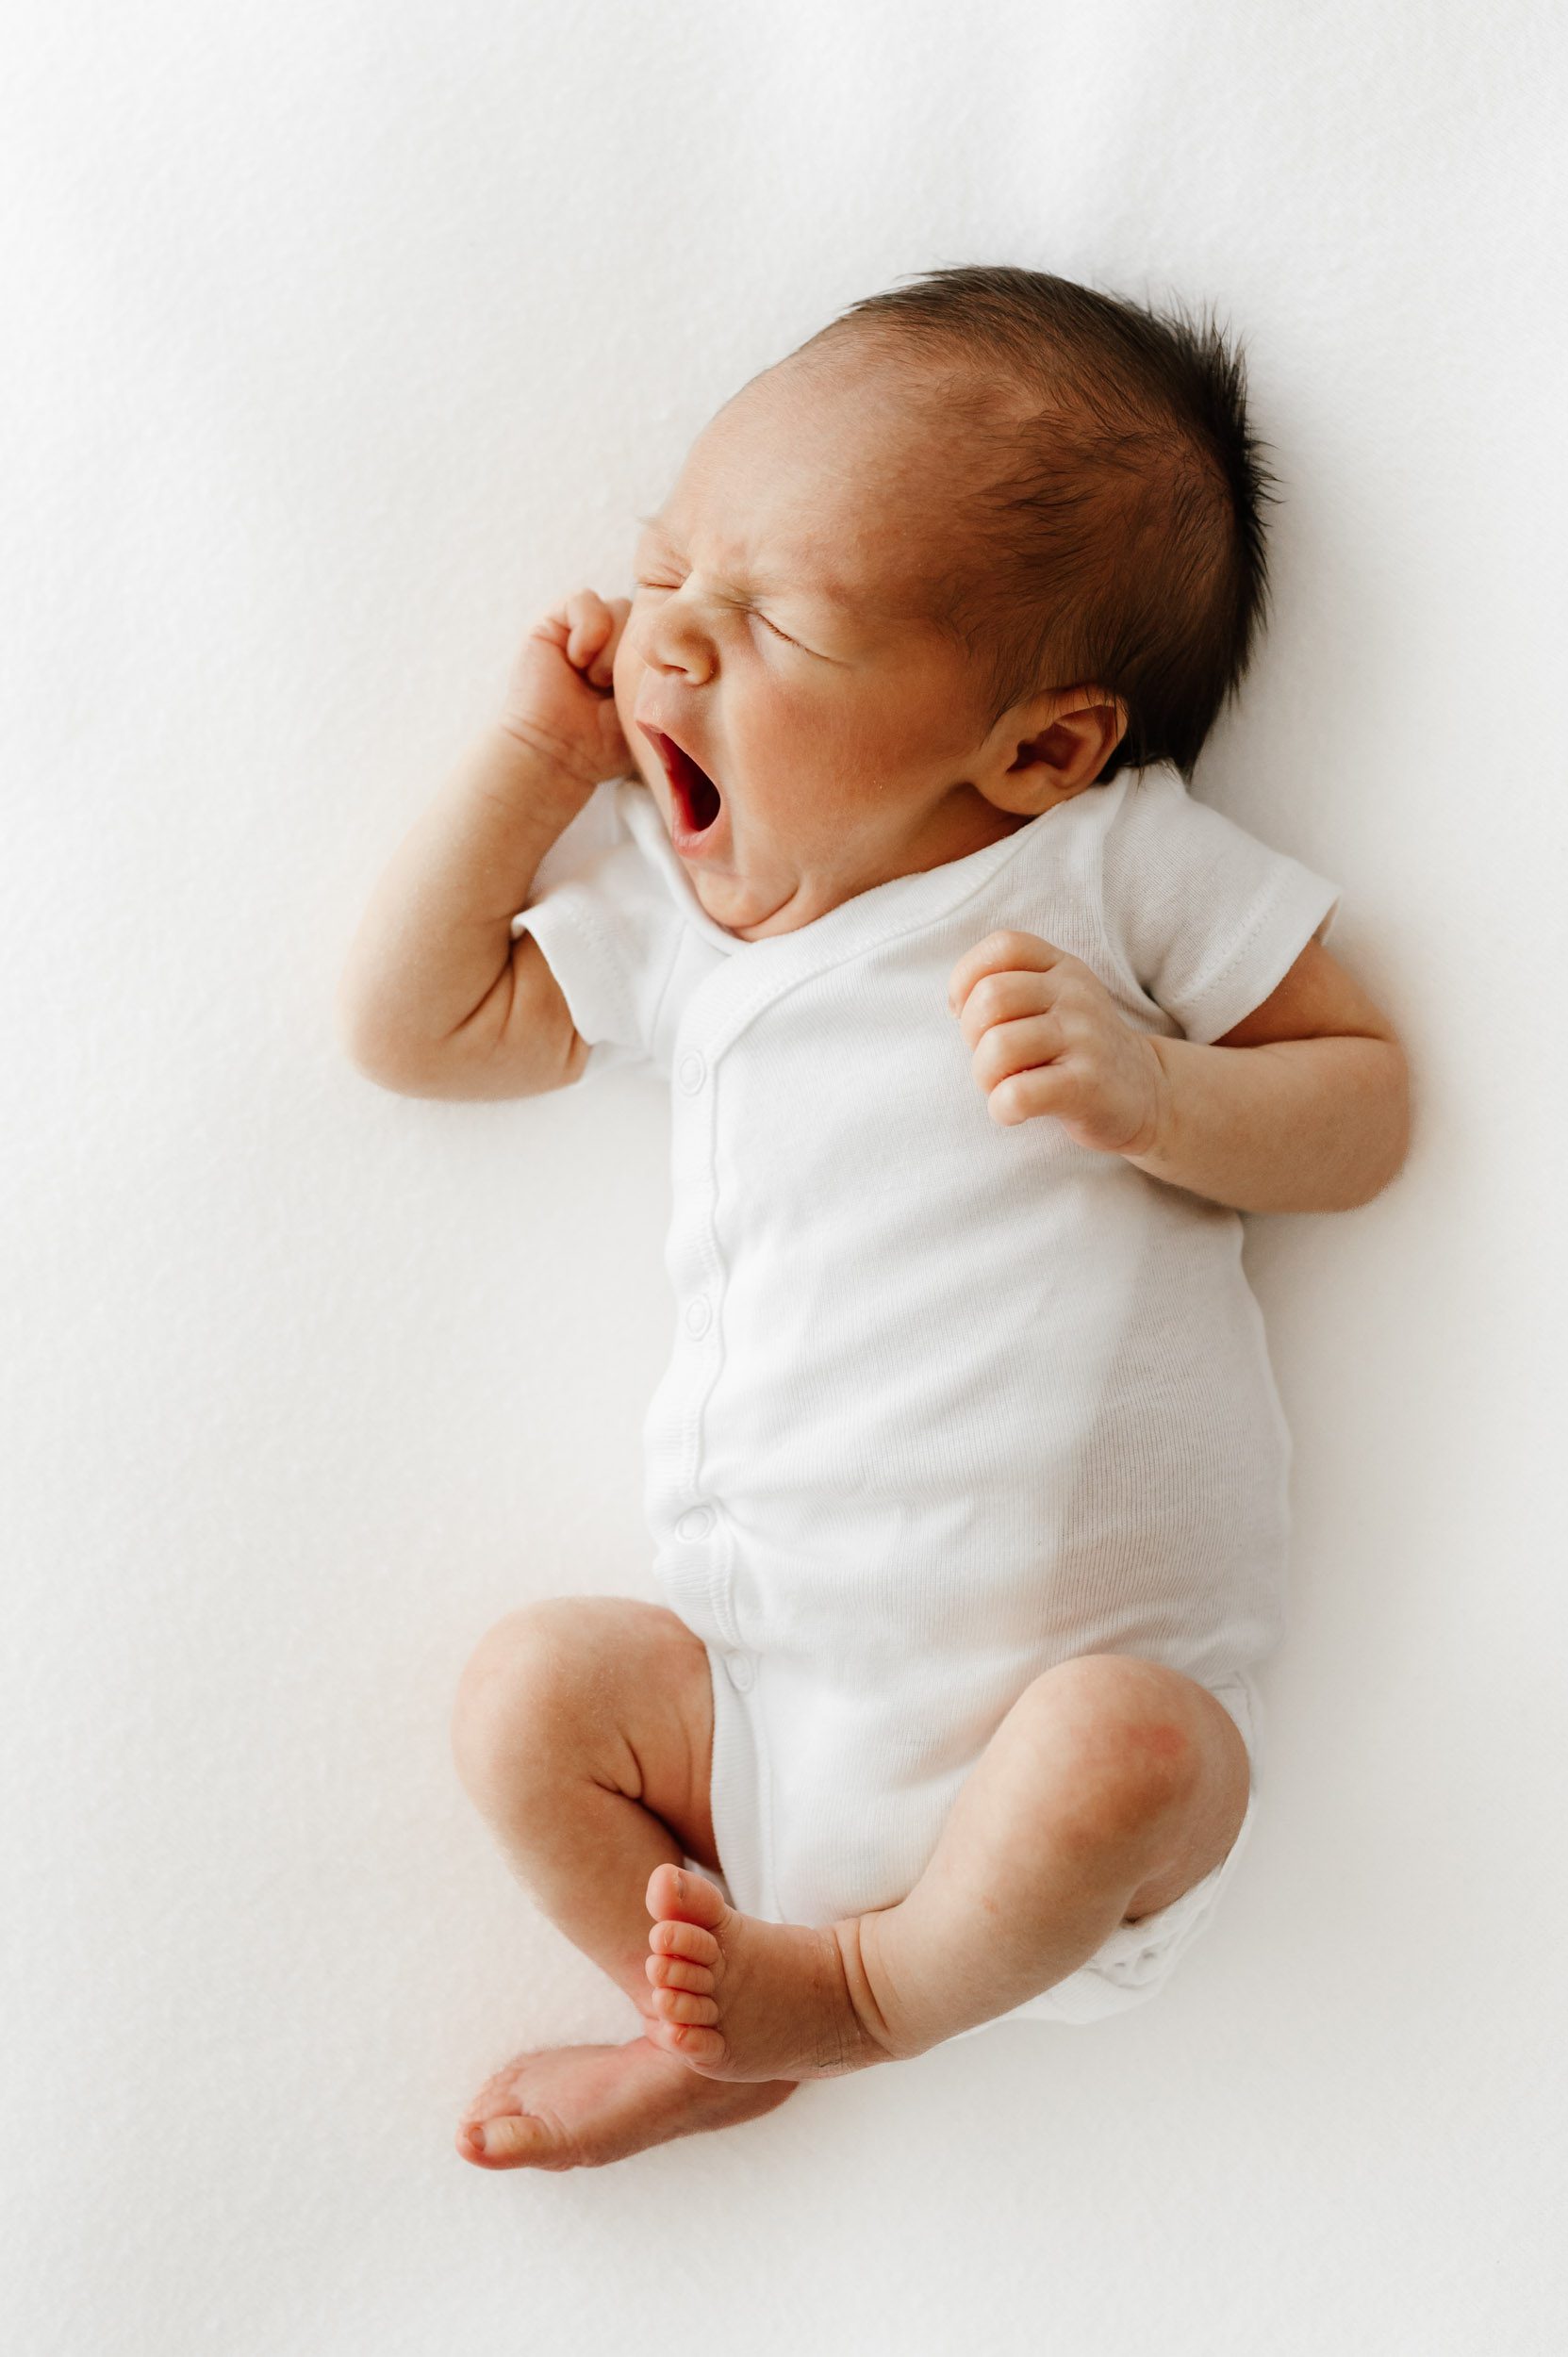 a baby wearing a white onesie laying on a white backdrop holding his hands up to his face and yawning during a newborn photography session